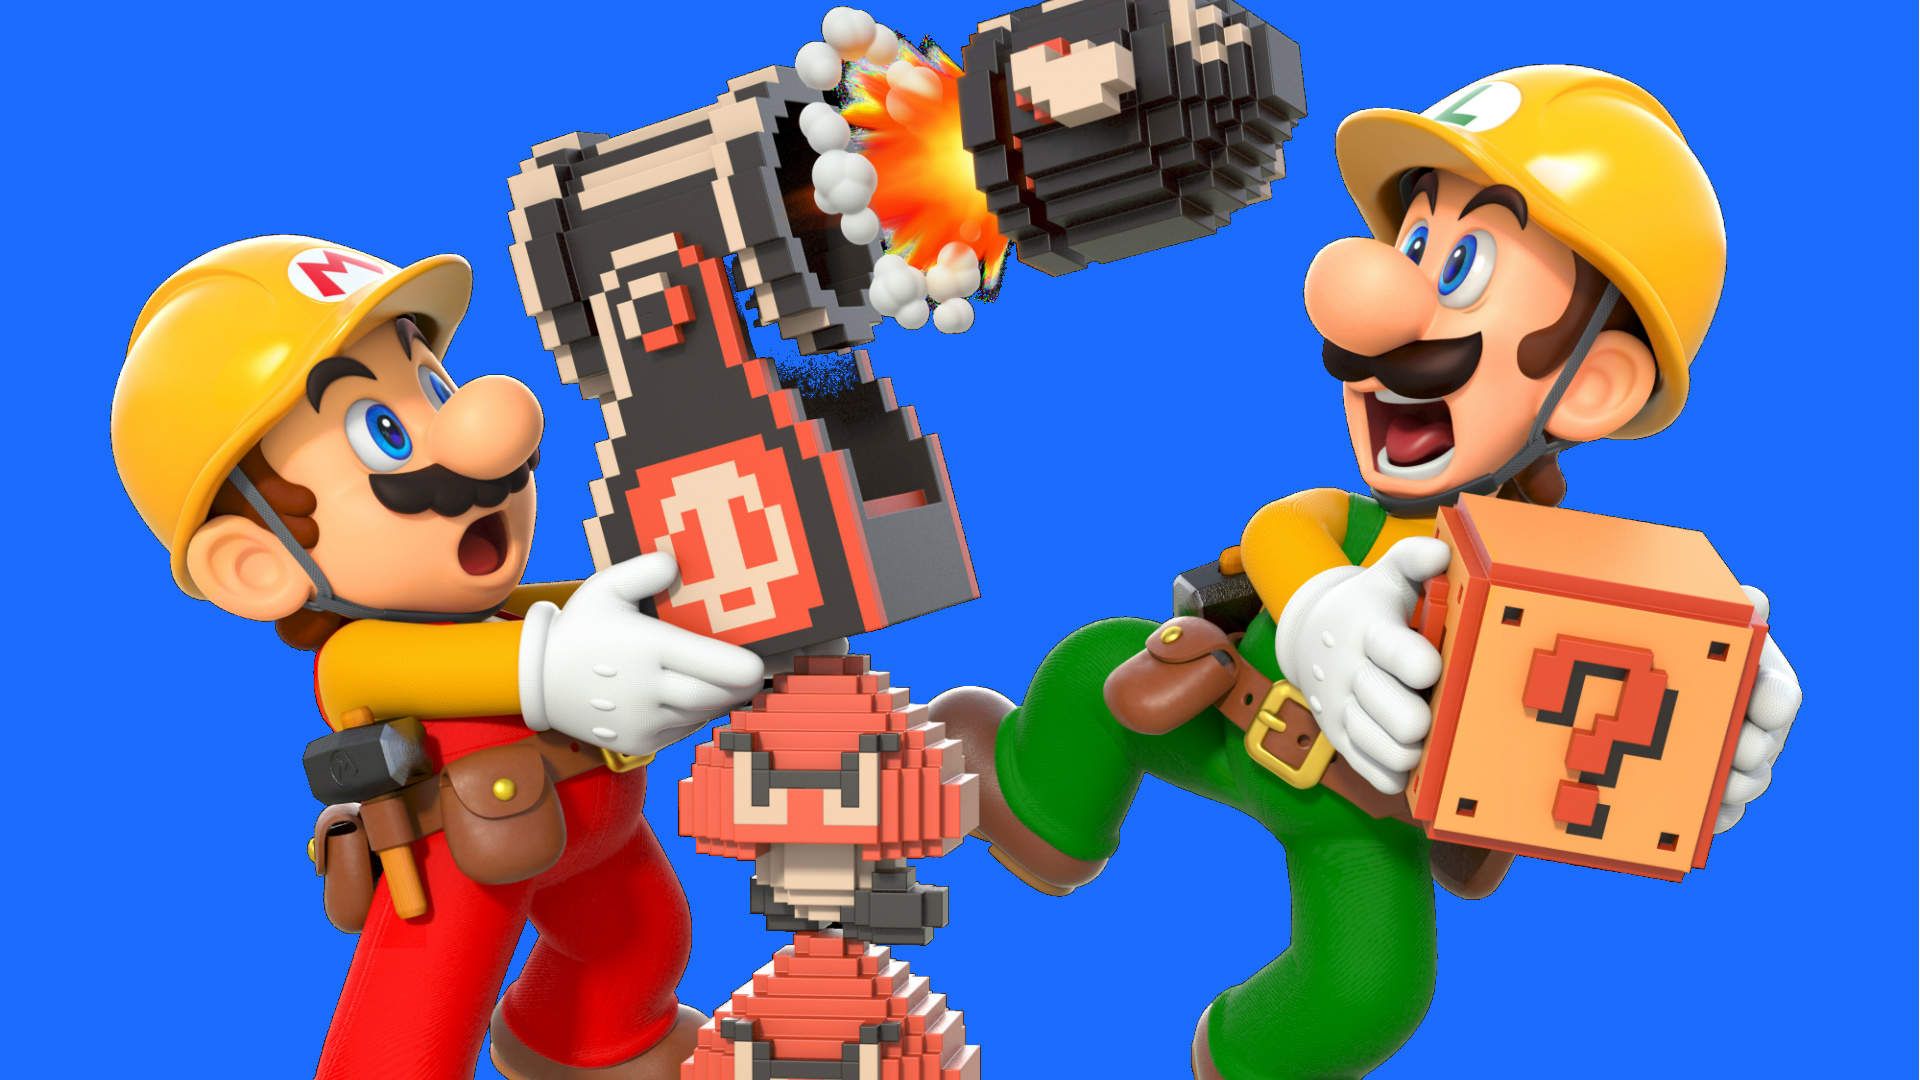 You Have to Unlock the Night Theme in Super Mario Maker 2